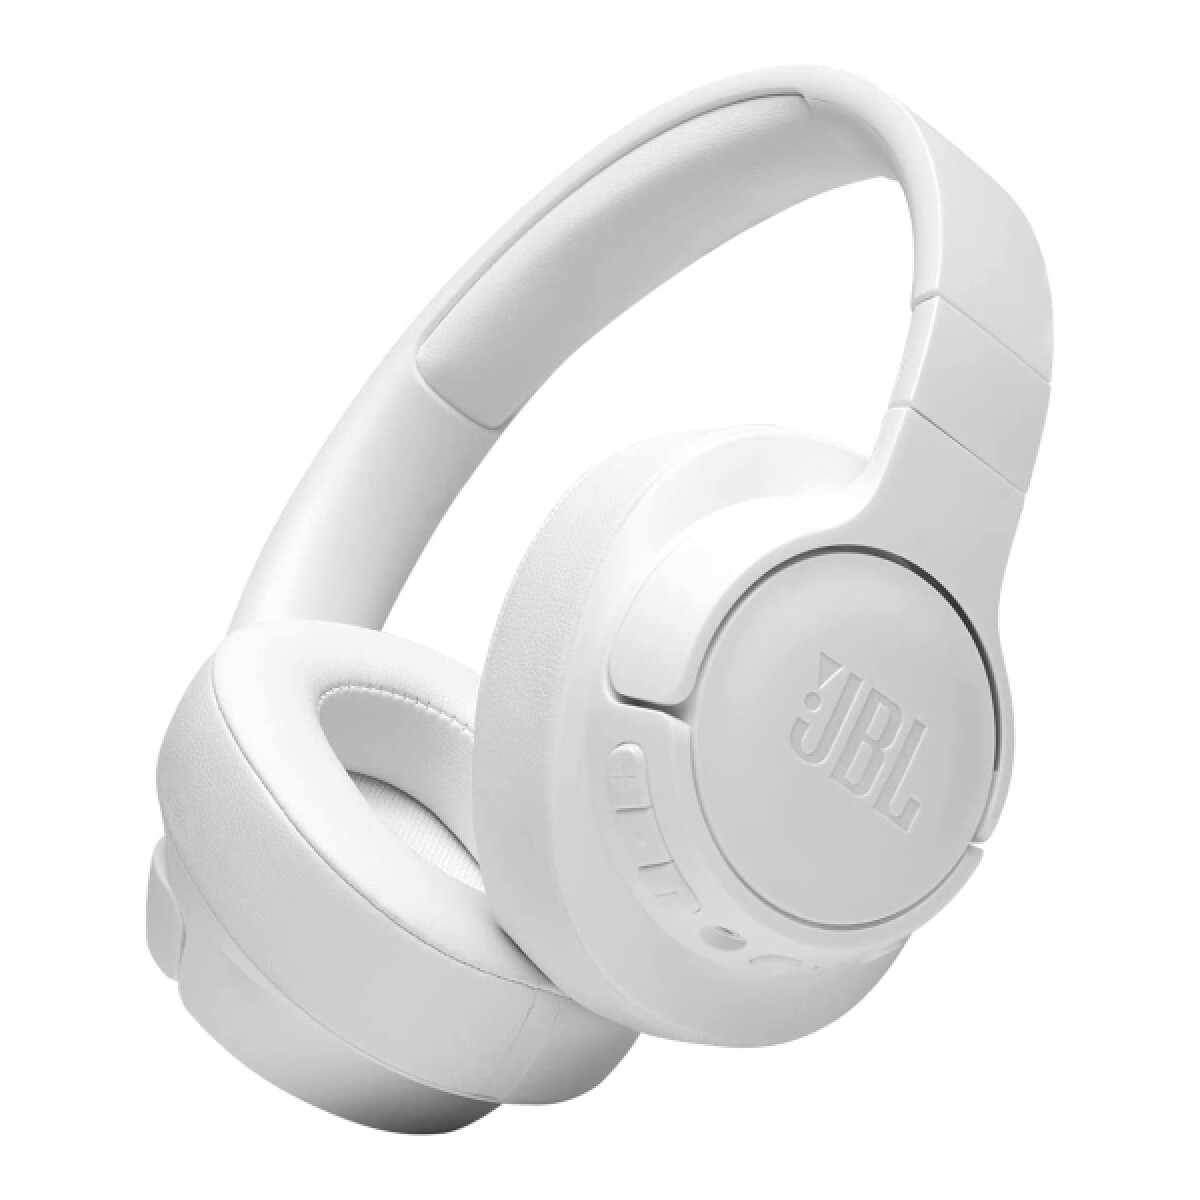 Auricular inalambrico bluetooth jbl t760 noise cancelling - Blanco 